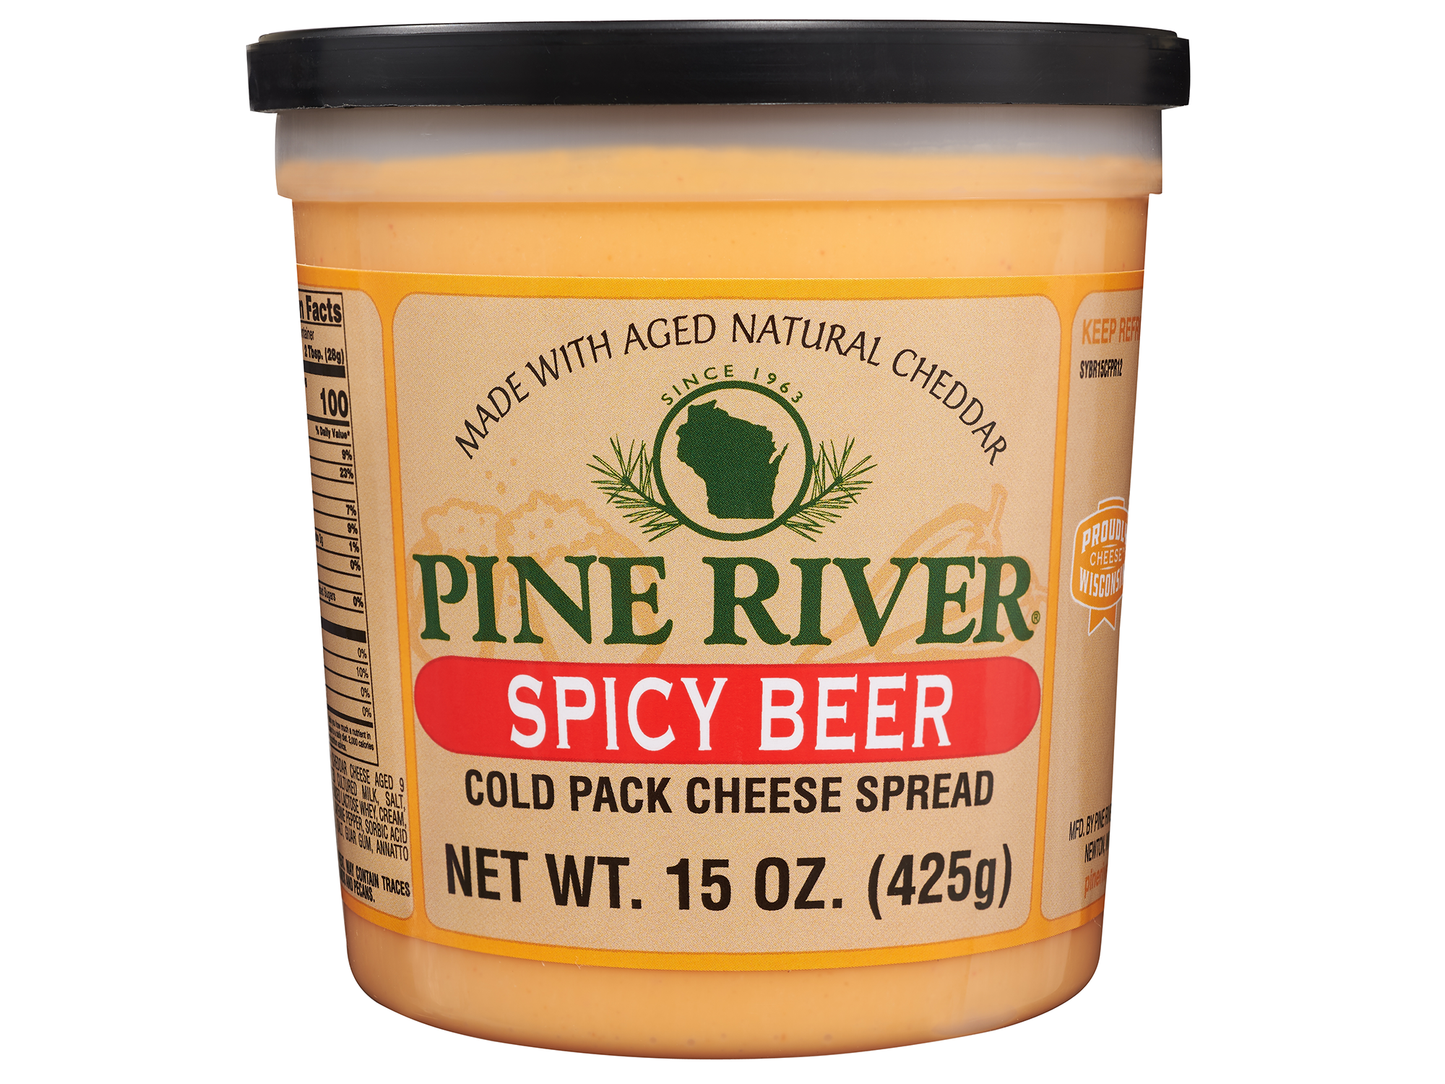 Spicy Beer Cold Pack Cheese Spread